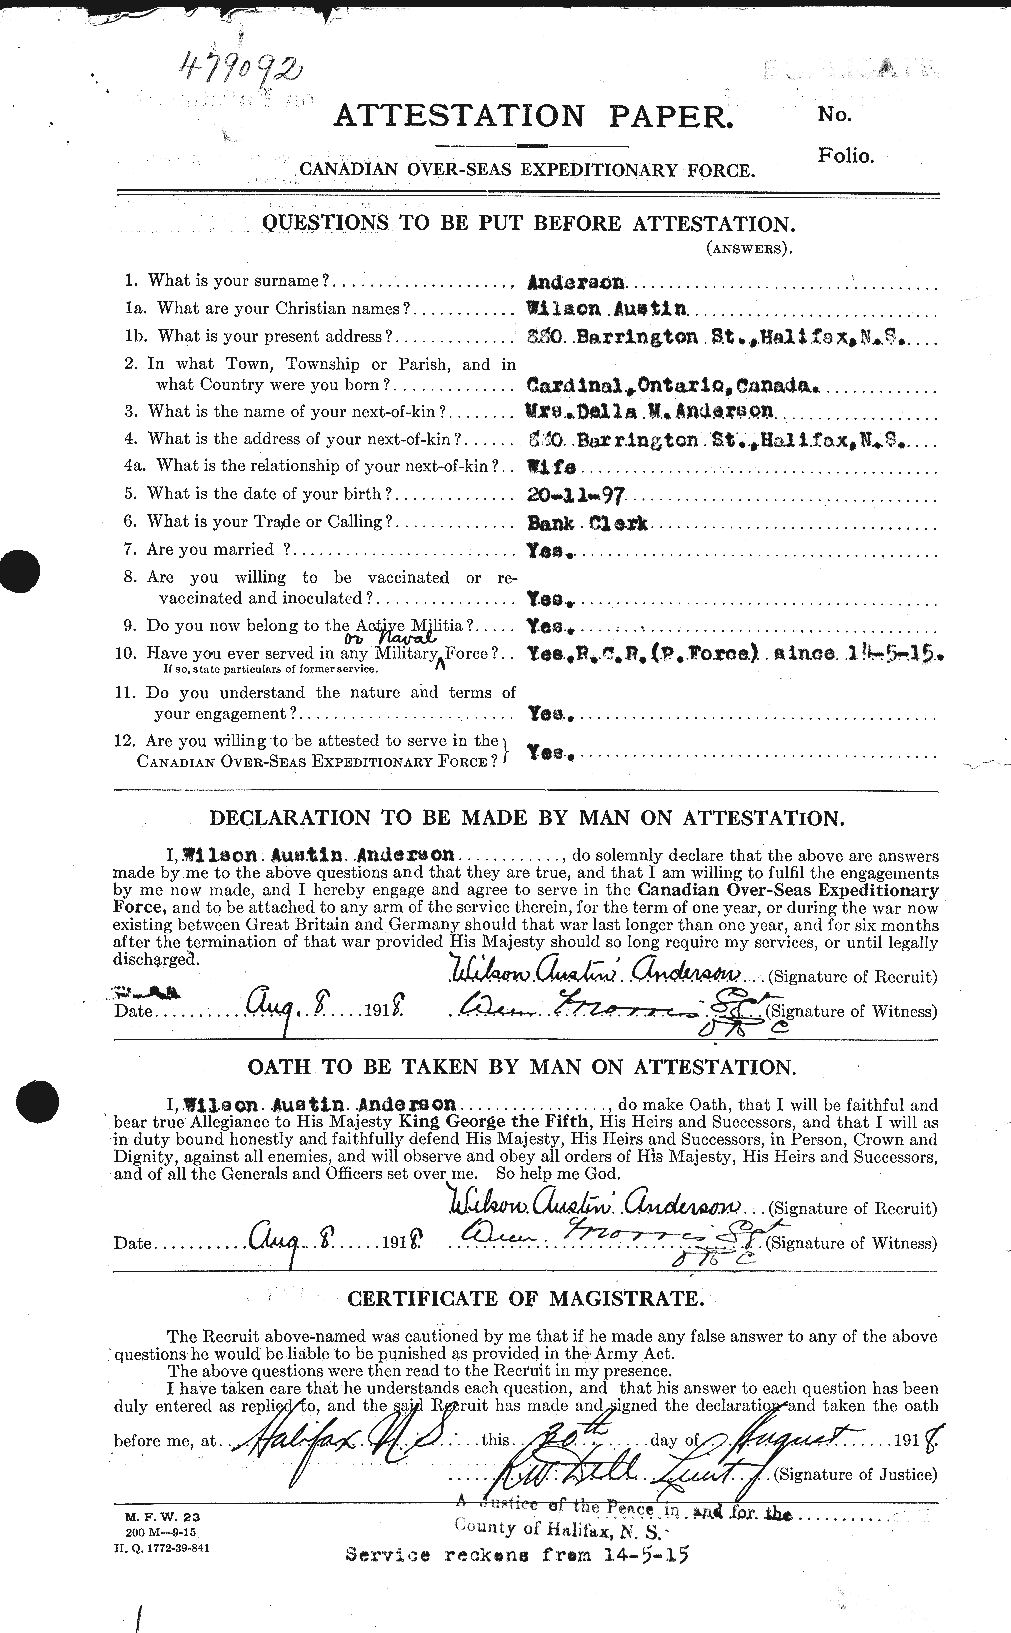 Personnel Records of the First World War - CEF 210855a